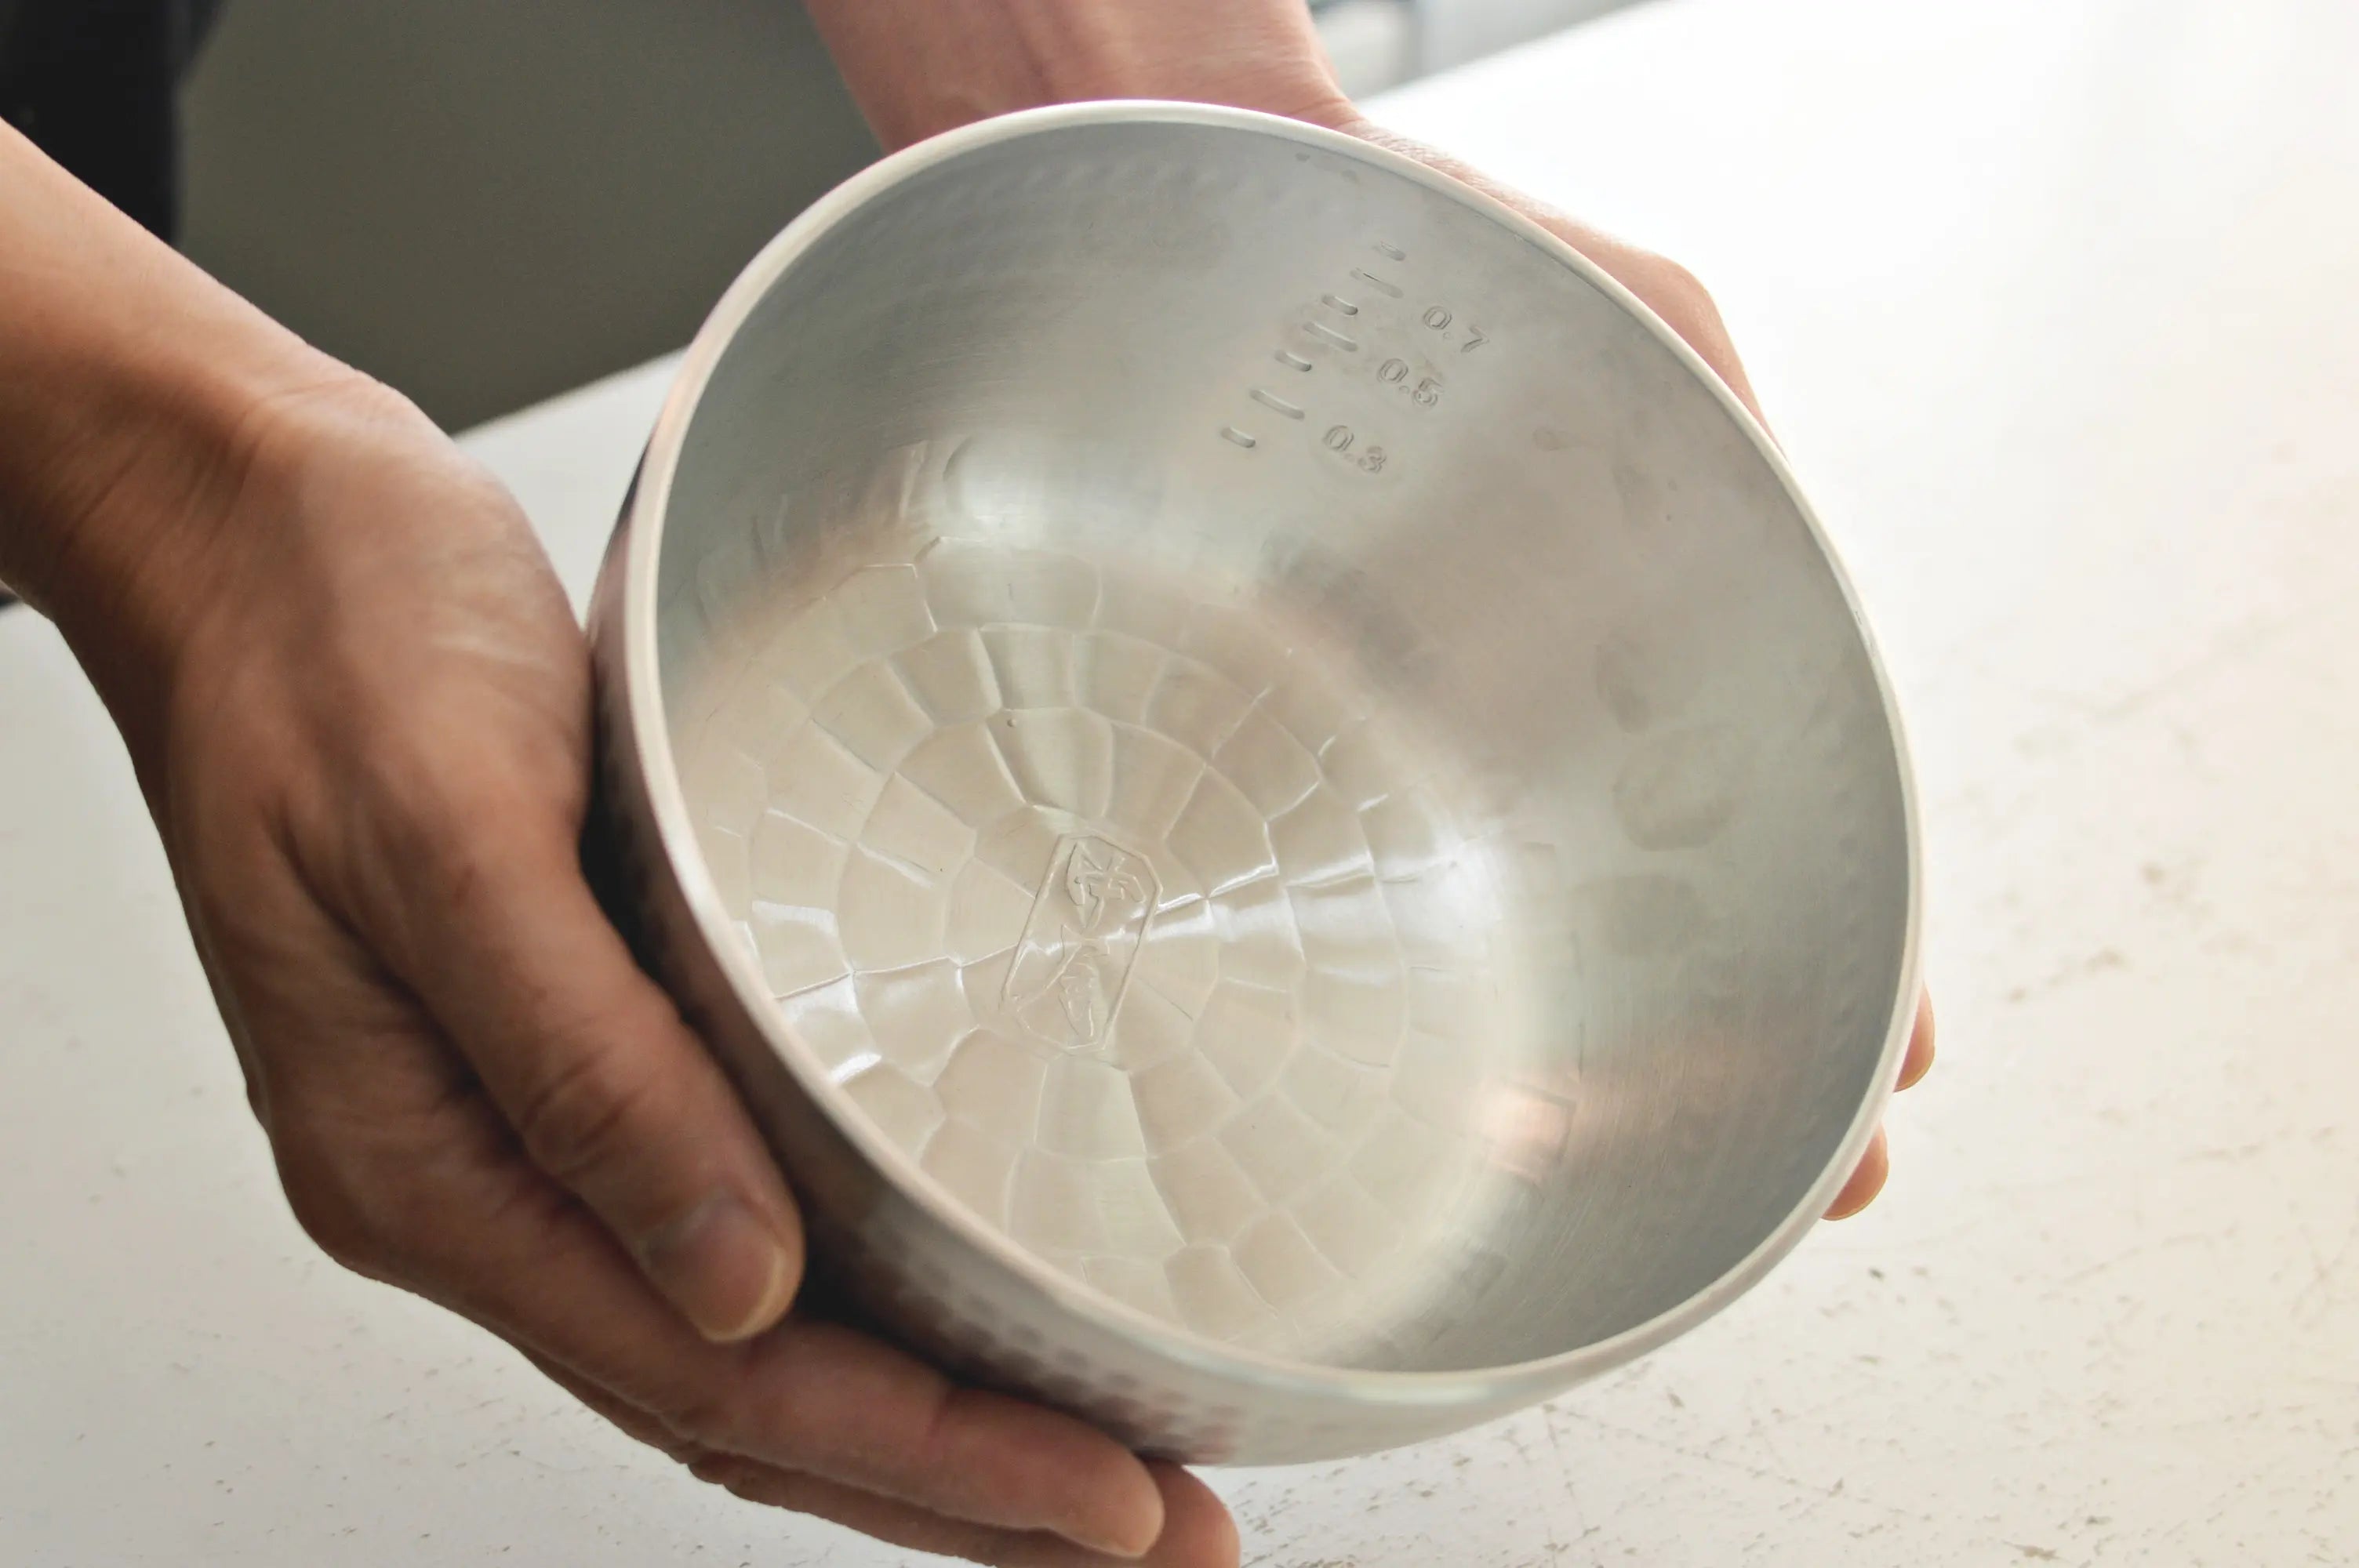 Yattoko pots come in different materials, such as aluminium or stainless steel. In either case, wash them gently with a soft sponge and dish soap after each use, and then dry them thoroughly.